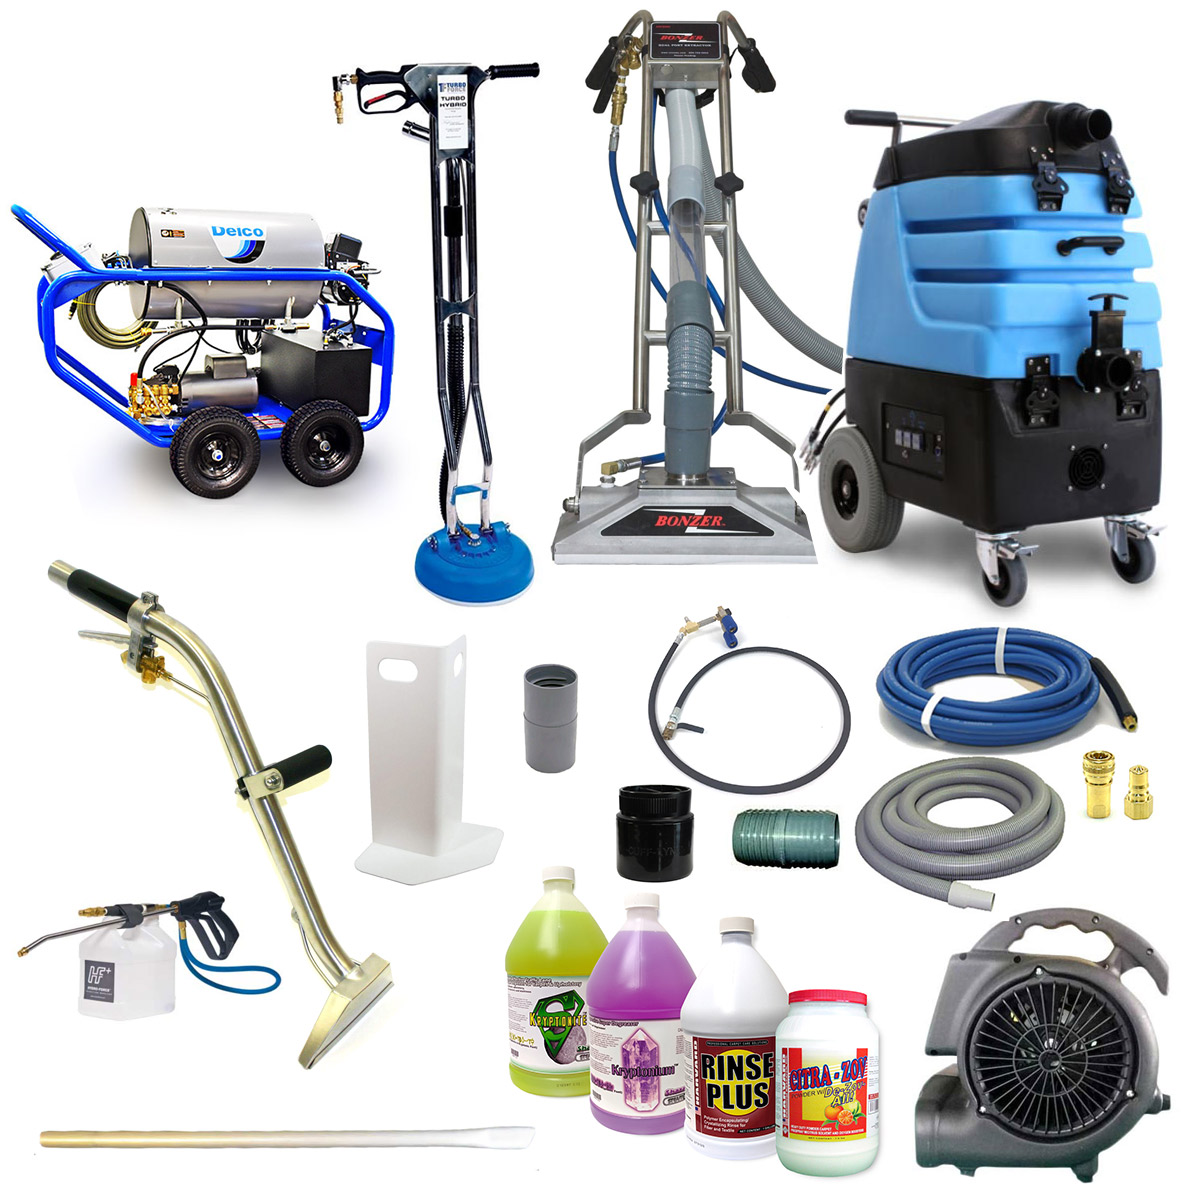 FNA Group Delco 65080 Electric Heated 1000Psi Pressure Washer Mytee 7000lx TH40 Tile And Rotovac Carpet Cleaning Bundle 20230613